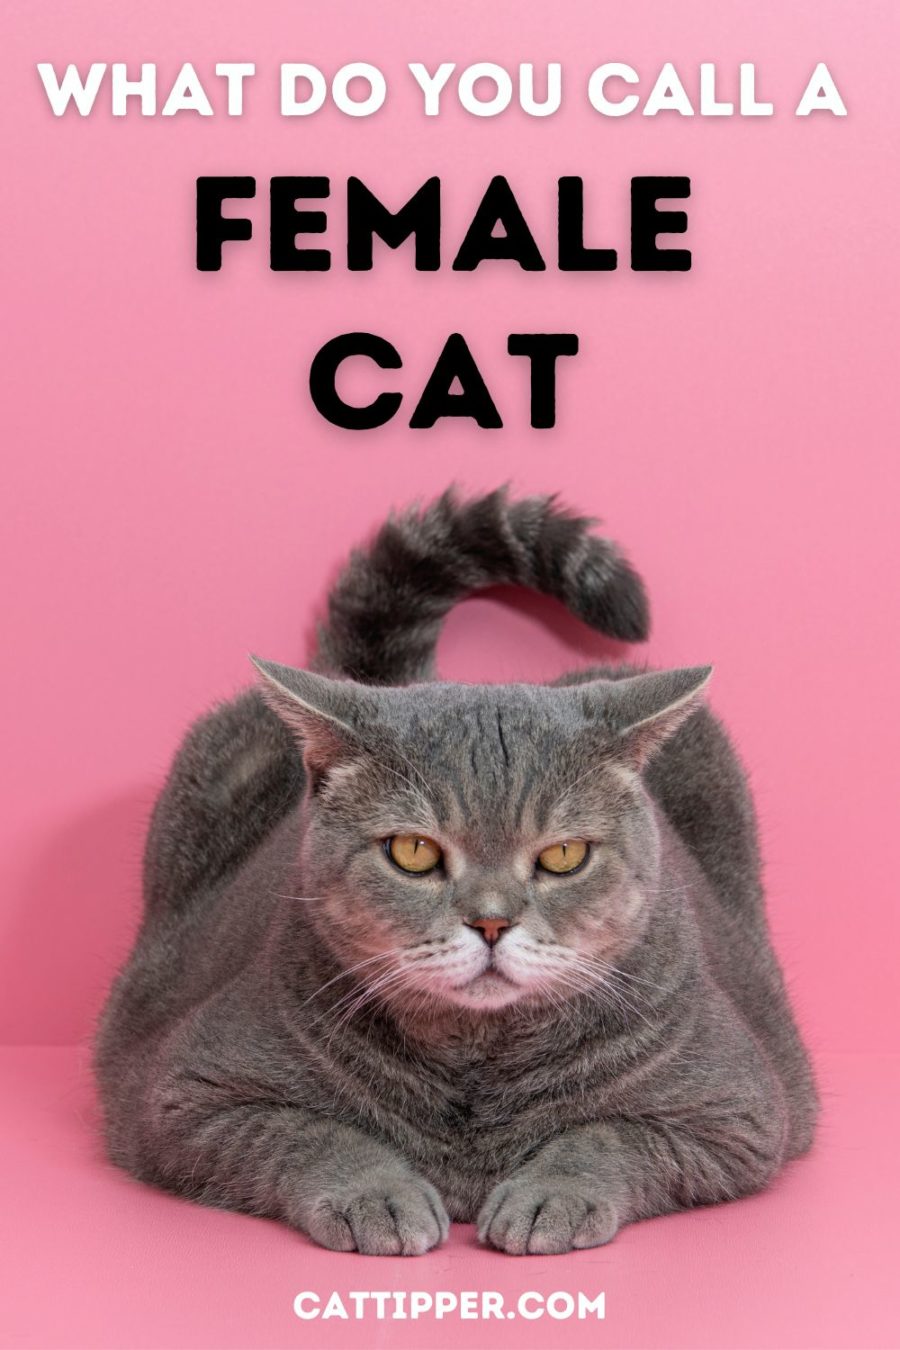 What are girl cats called?